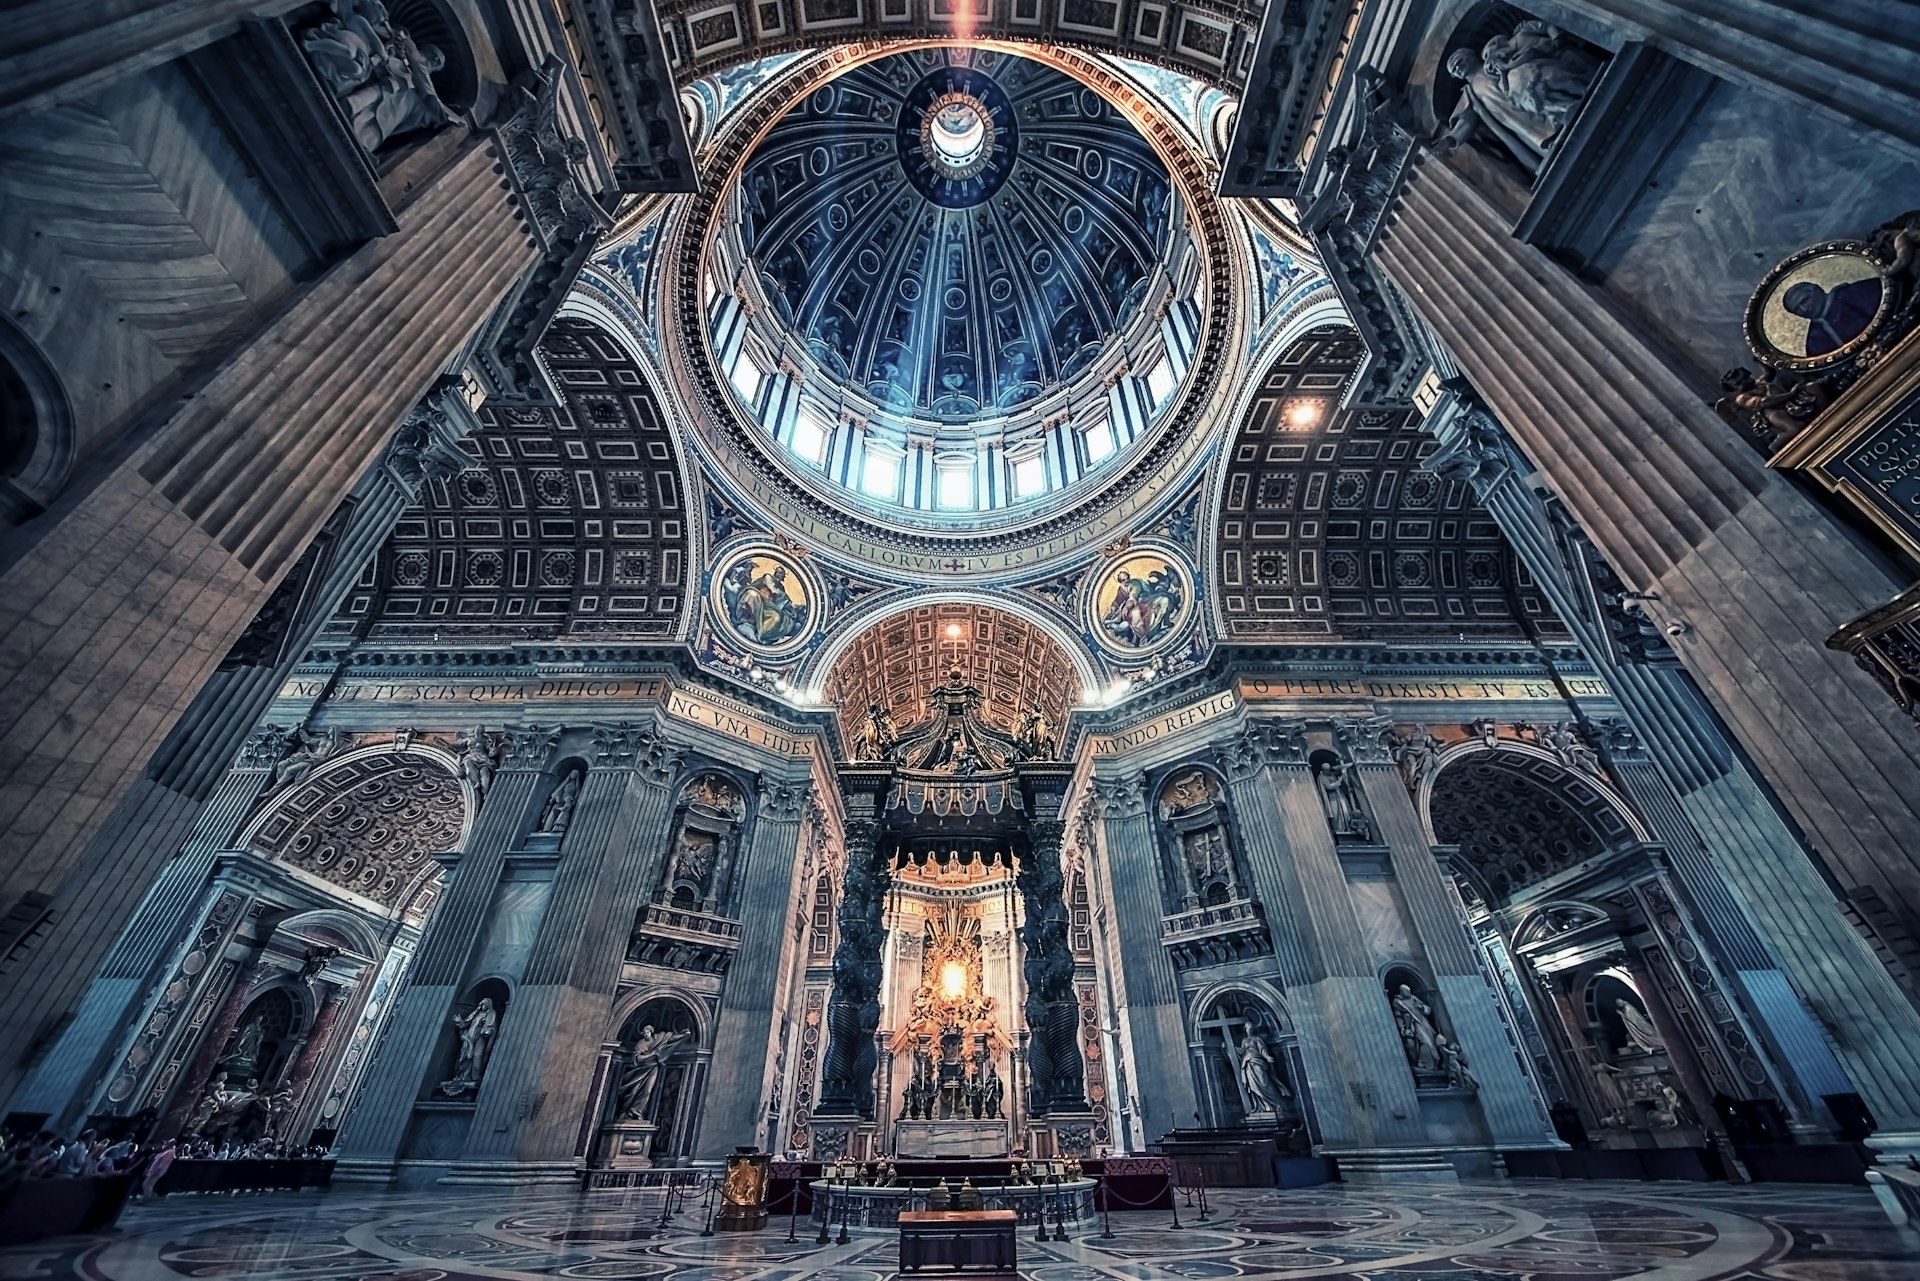 Inside an empty St Peter's Basilica in Rome looking up at the dome